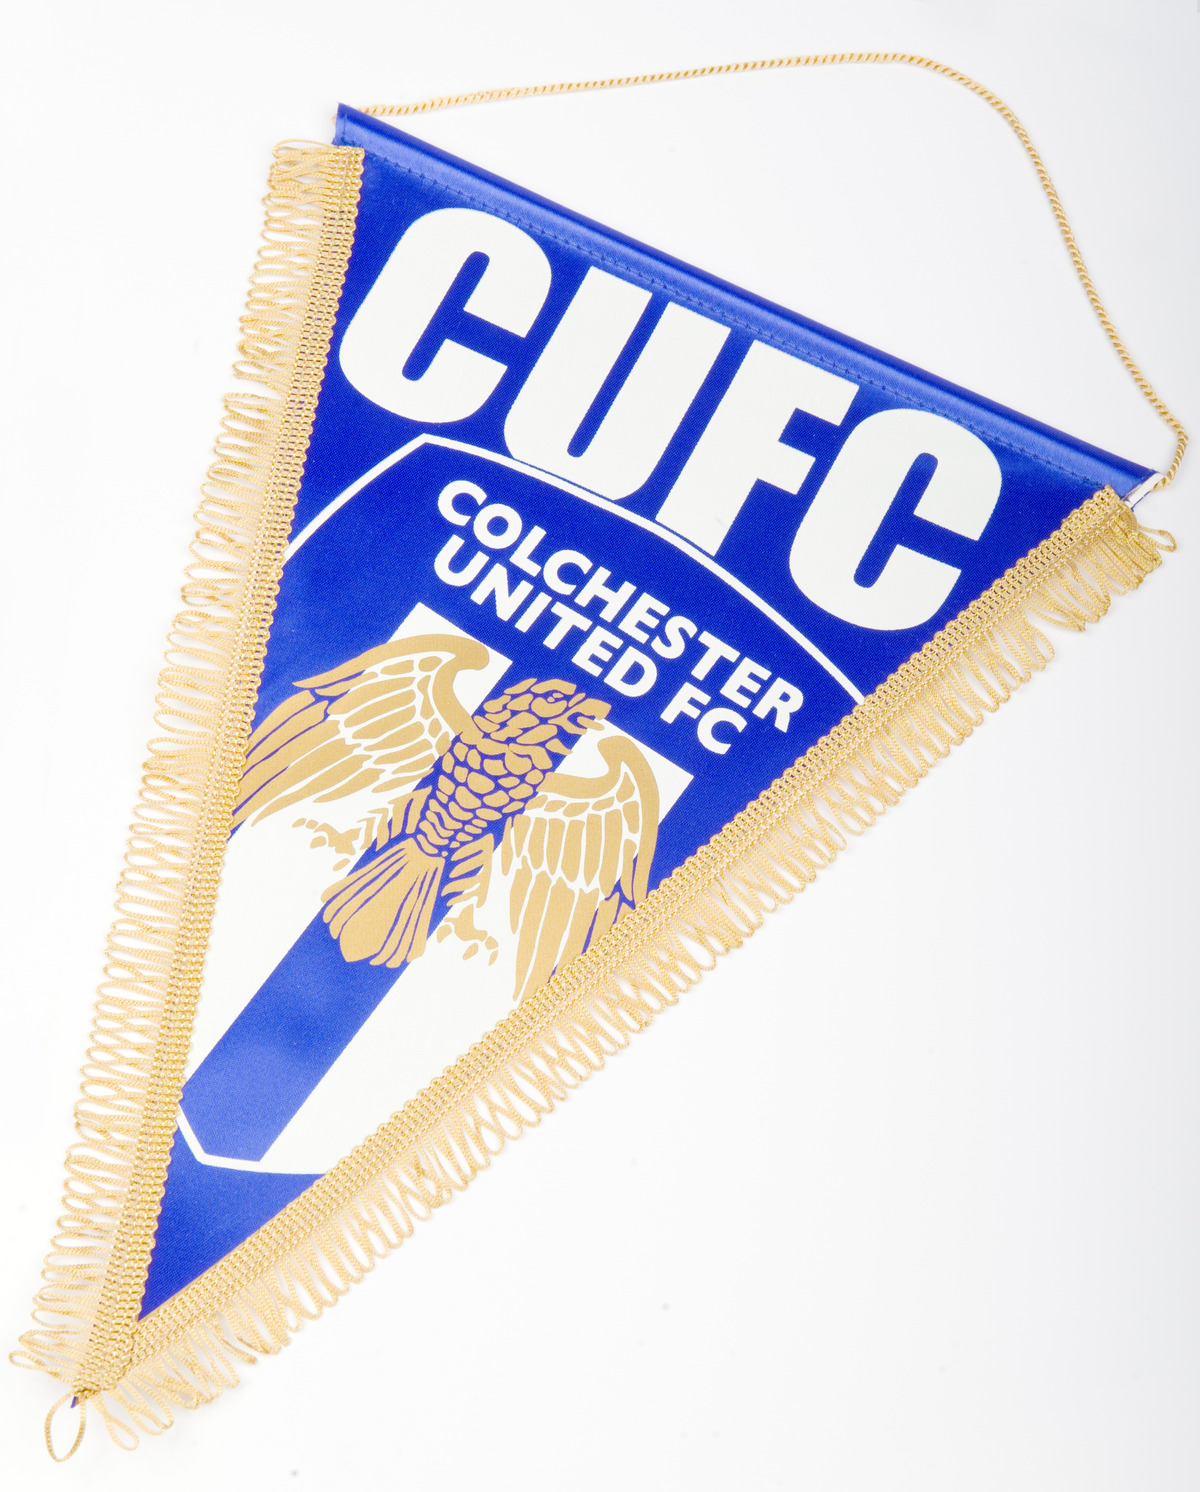 COLCHESTER UNITED PENNANT 